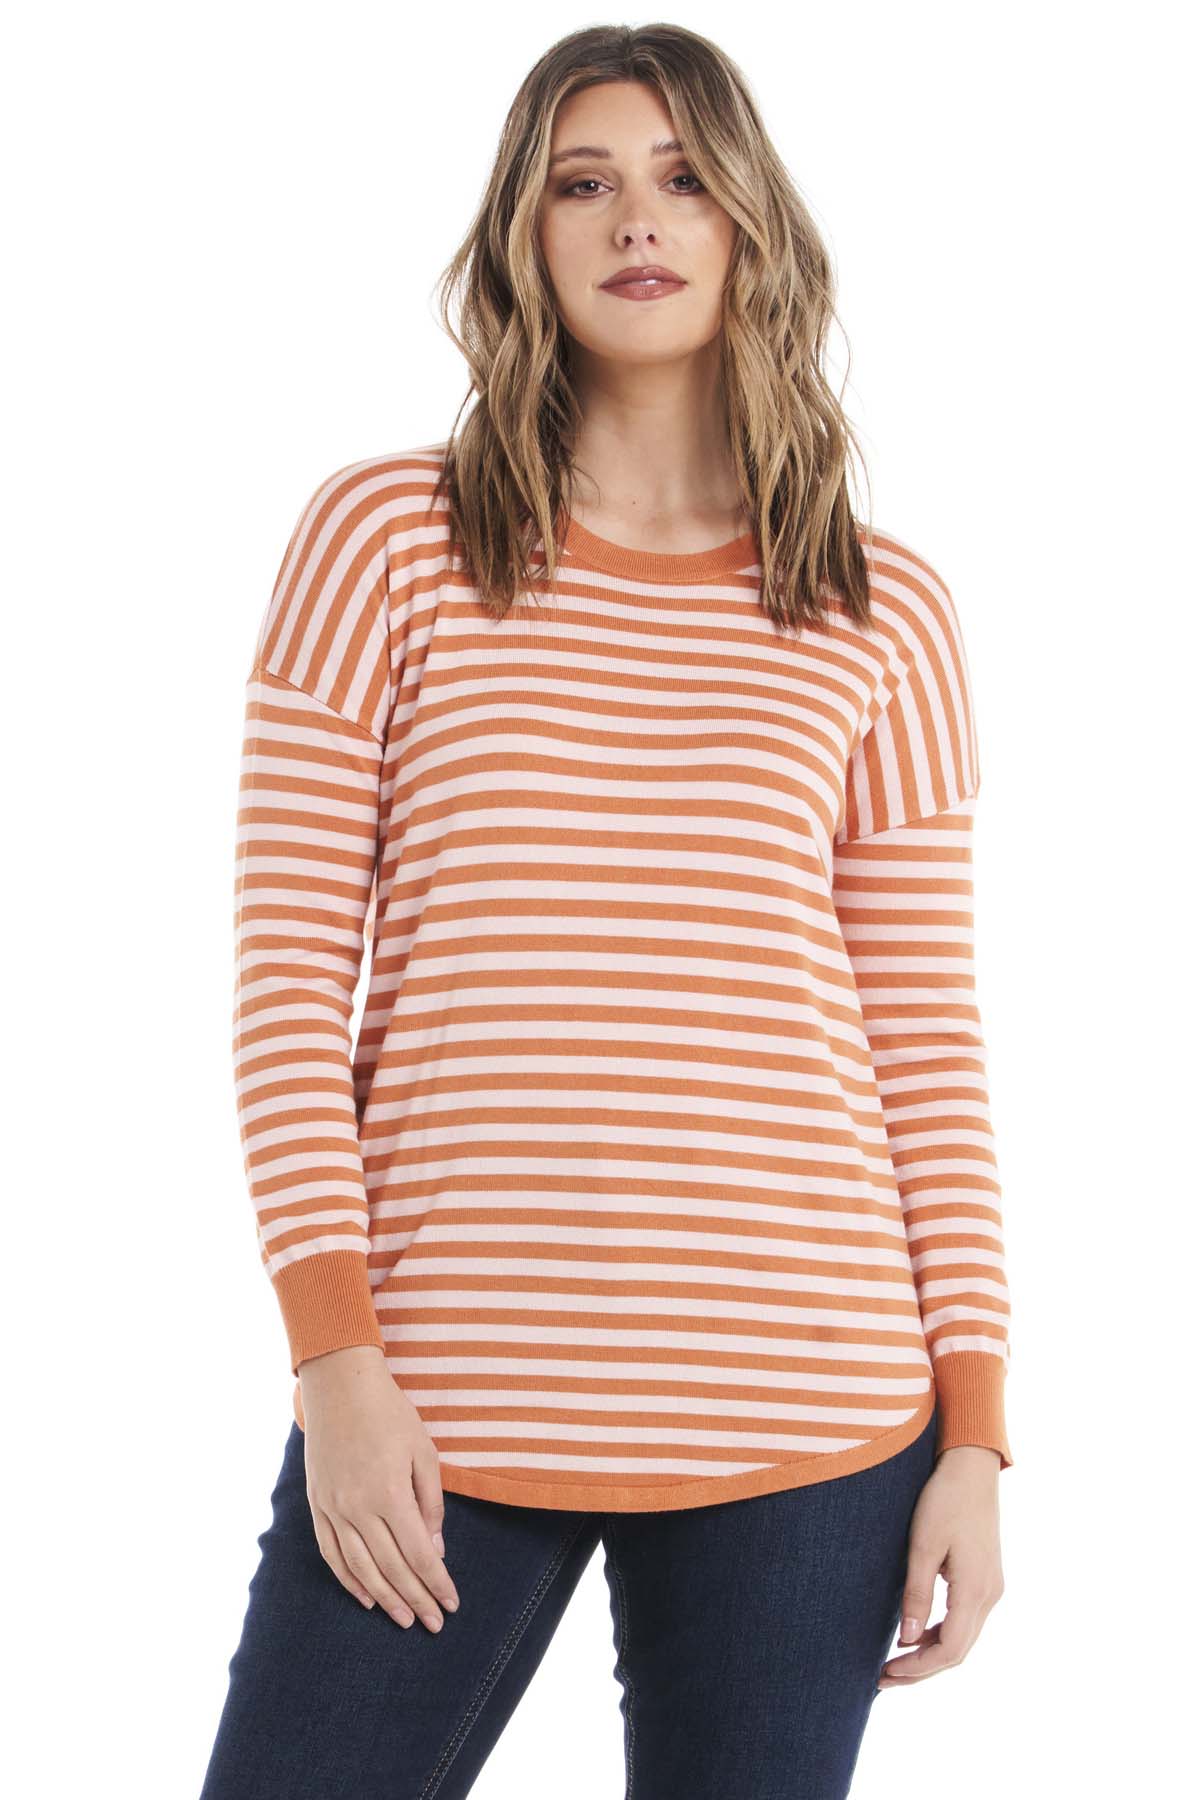 Betty Basics Sophie Knit Jumper in Pink and Apricot Stripe - Hey Sara